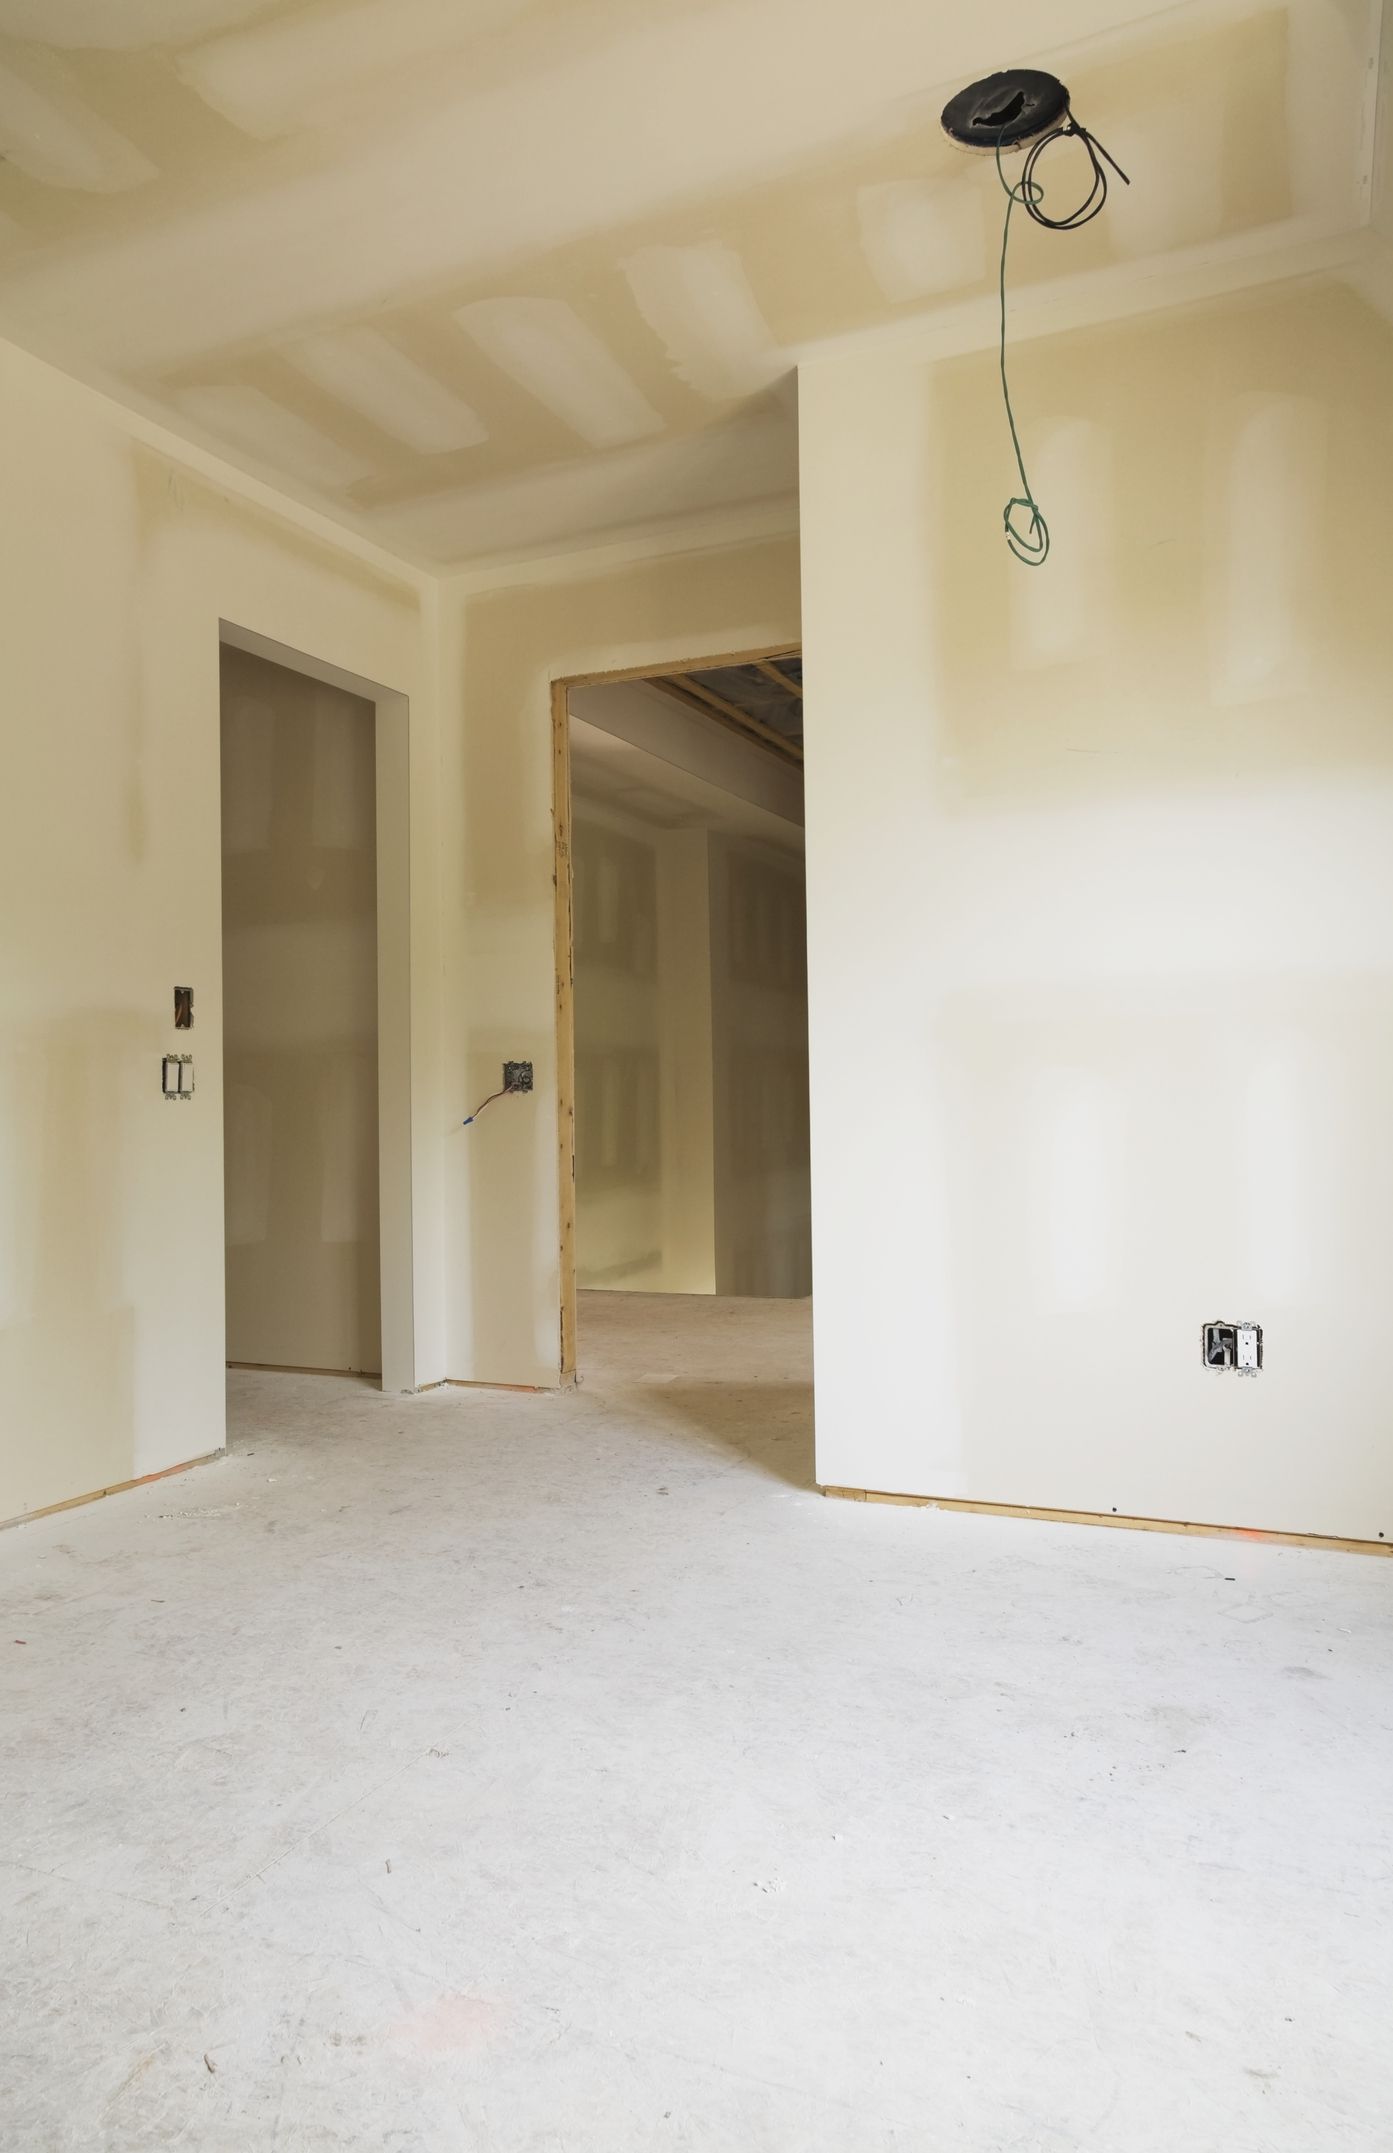 An unfinished room with hung drywall